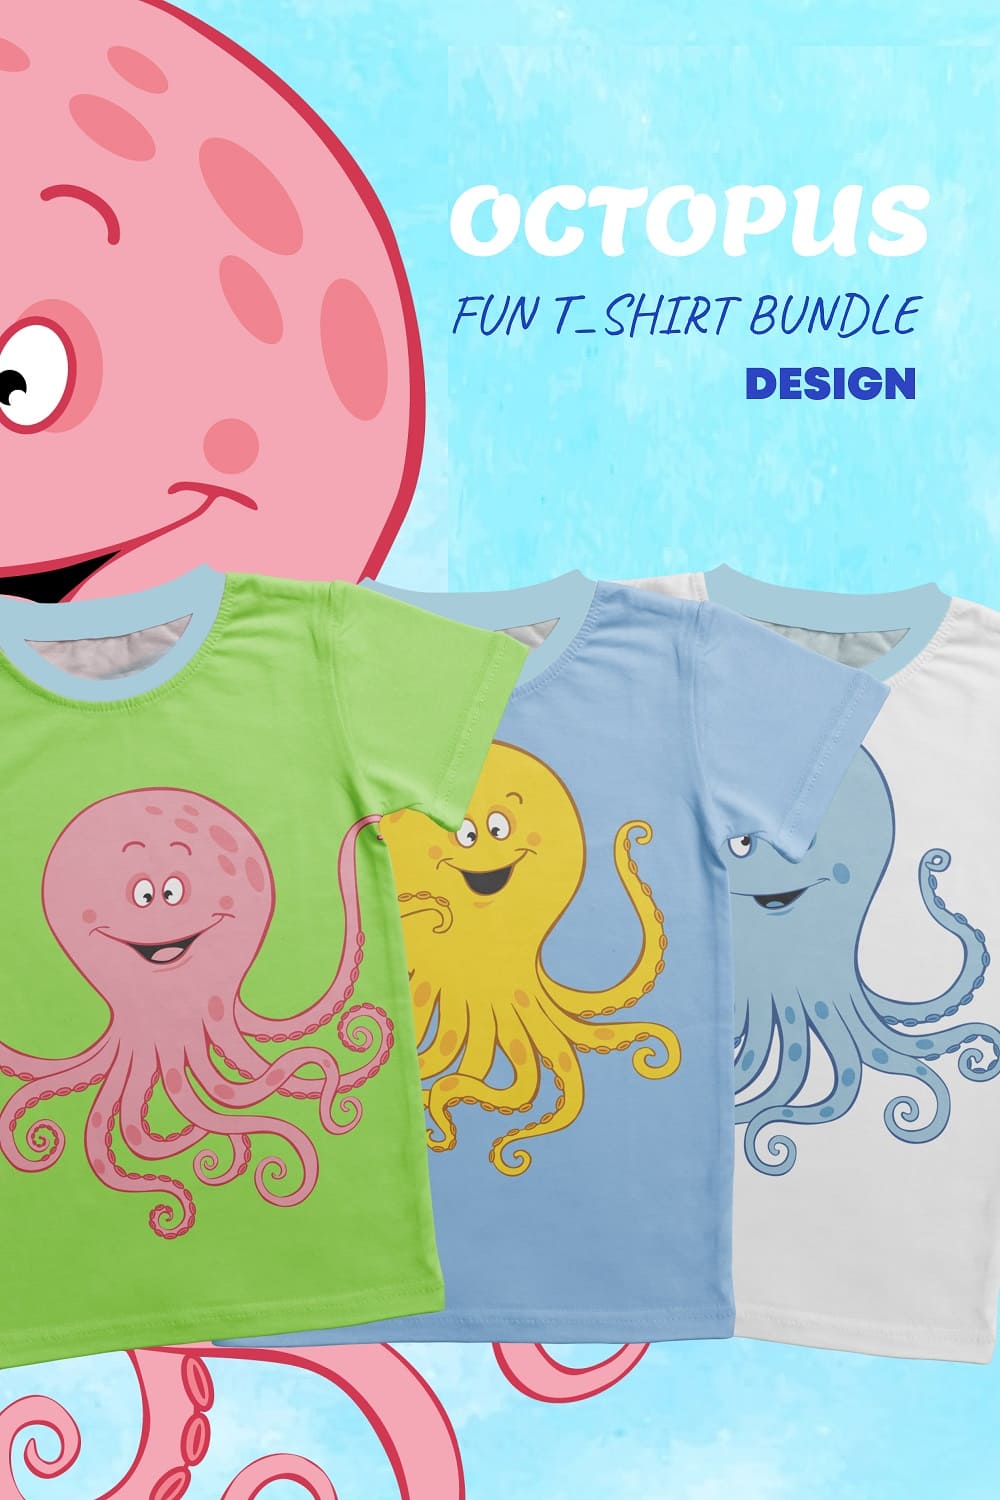 Three funny t-shirt designs with an octopus and a headline on a blue background.